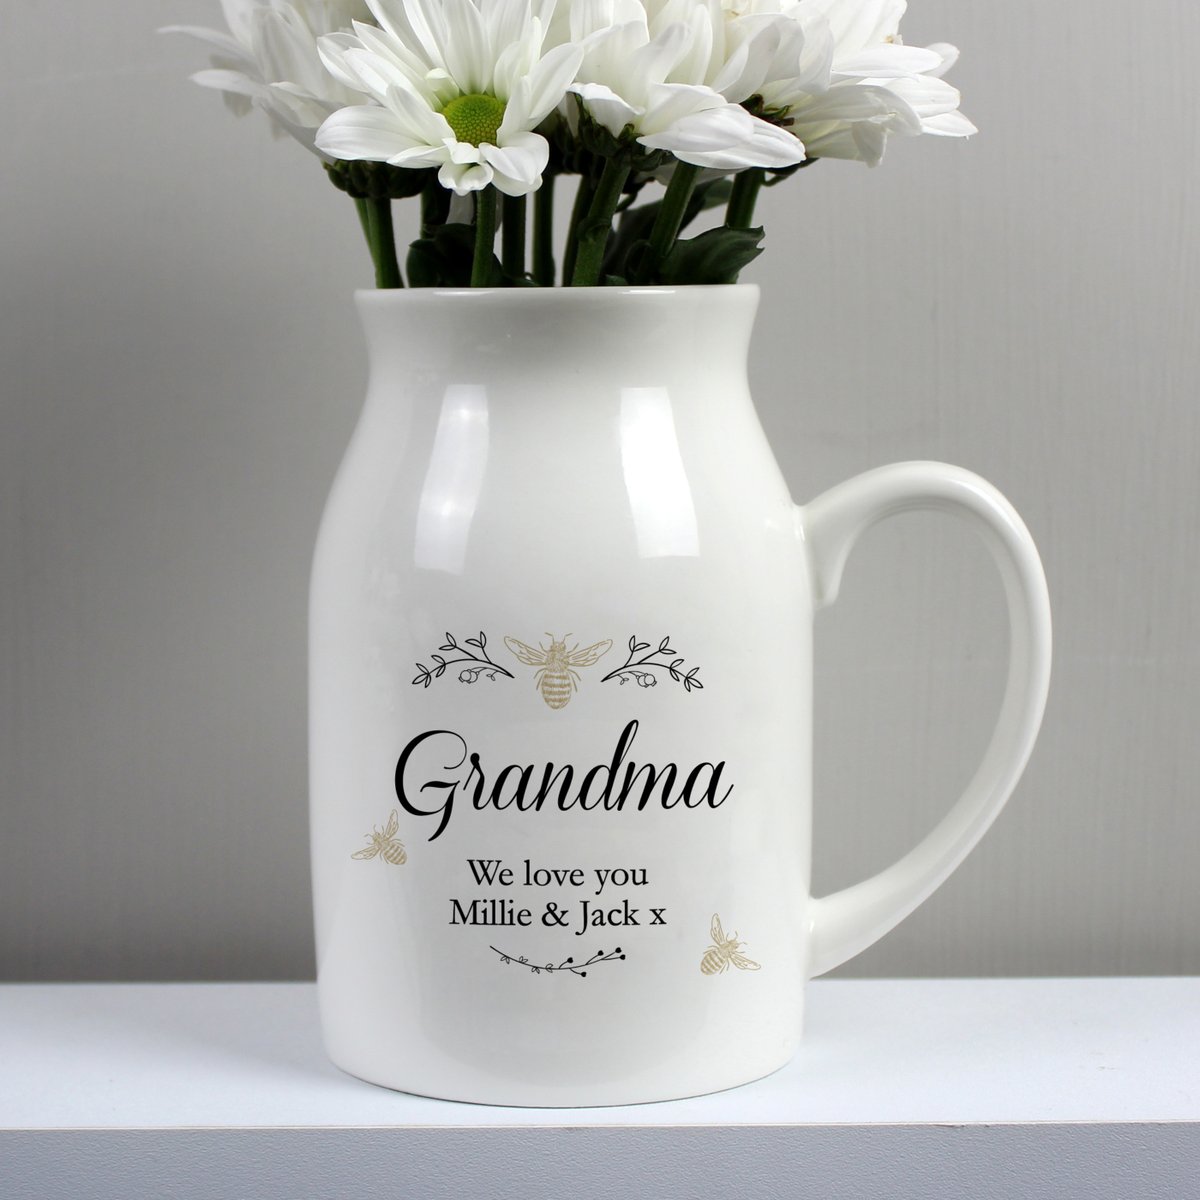 Another newbie to the website, this bee design jug vase can be personalised with any name / title & message lilyblueuk.co.uk/personalised-b…

#countrykitchen #giftideas #jug #vase #ceramic #personalised #bee #EarlyBiz